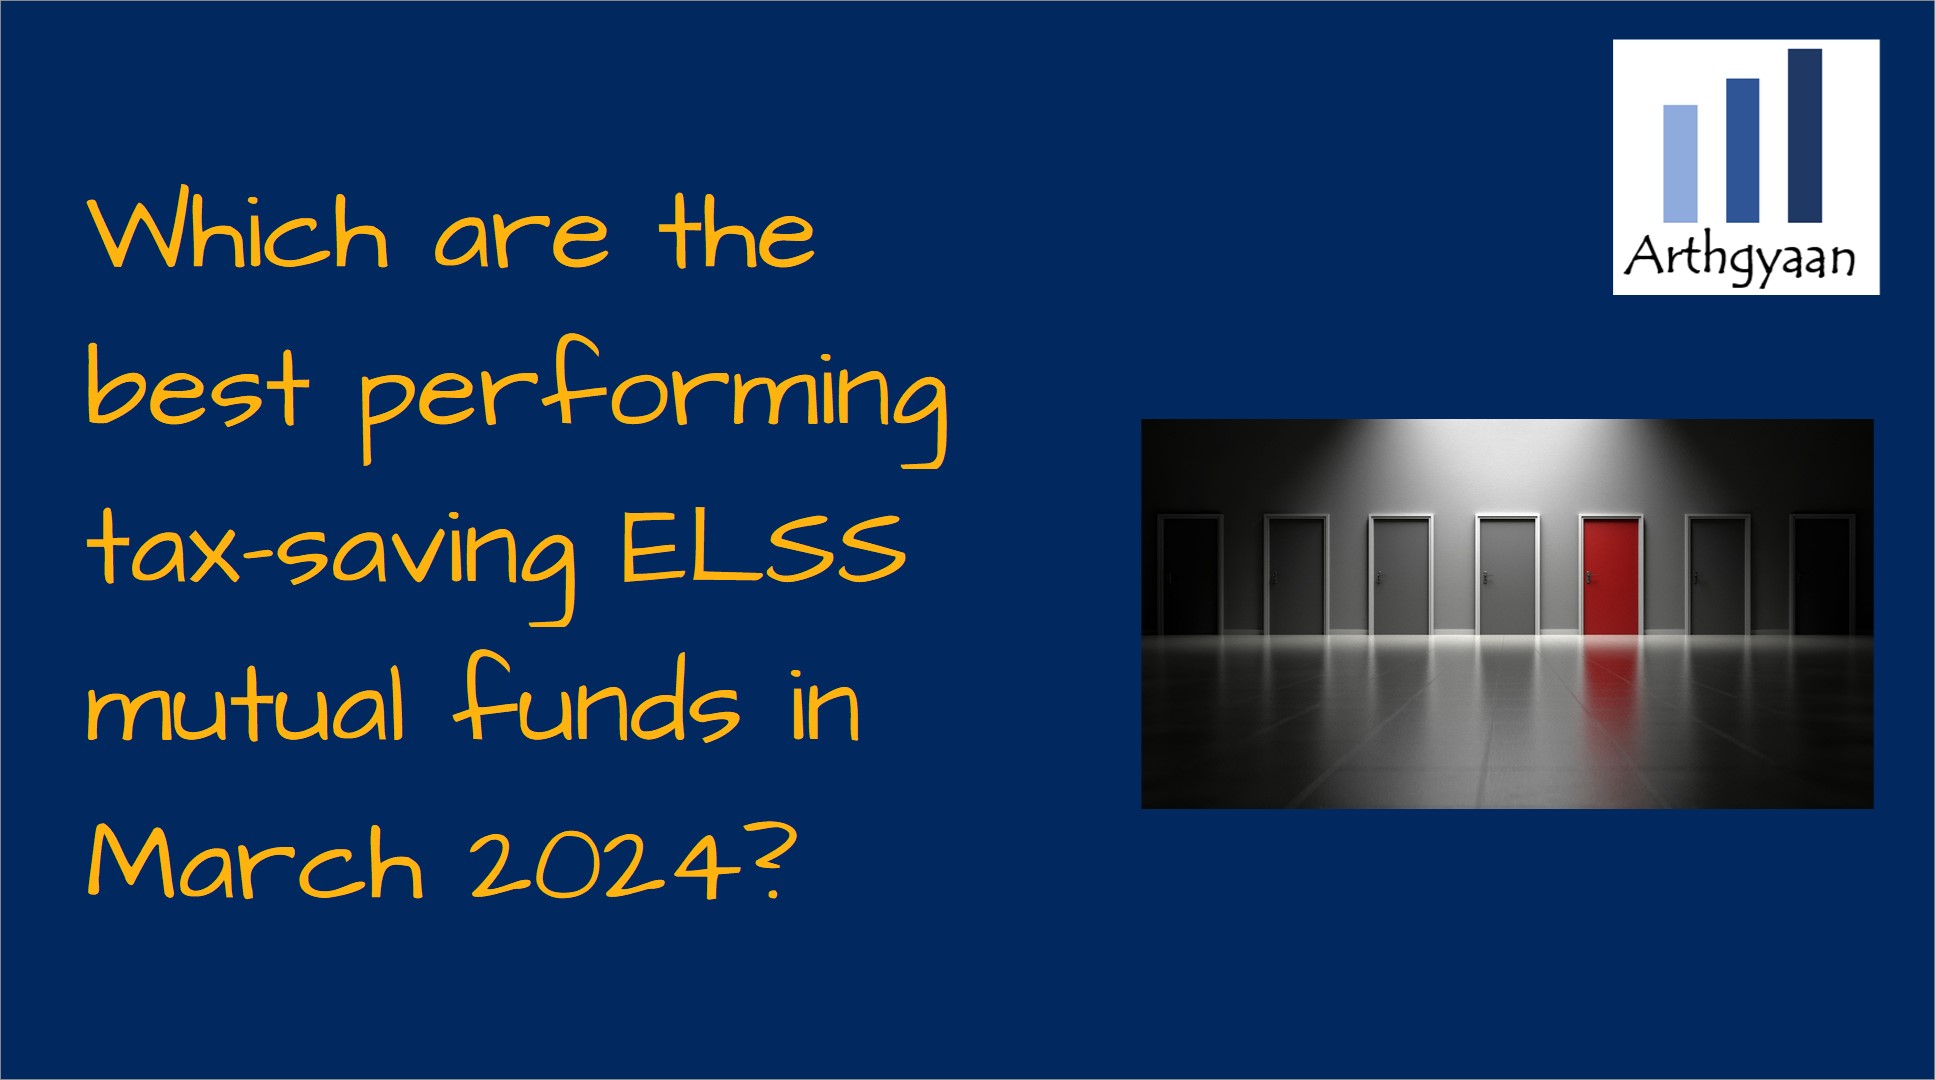 Which are the best performing tax-saving ELSS mutual funds in March 2024?